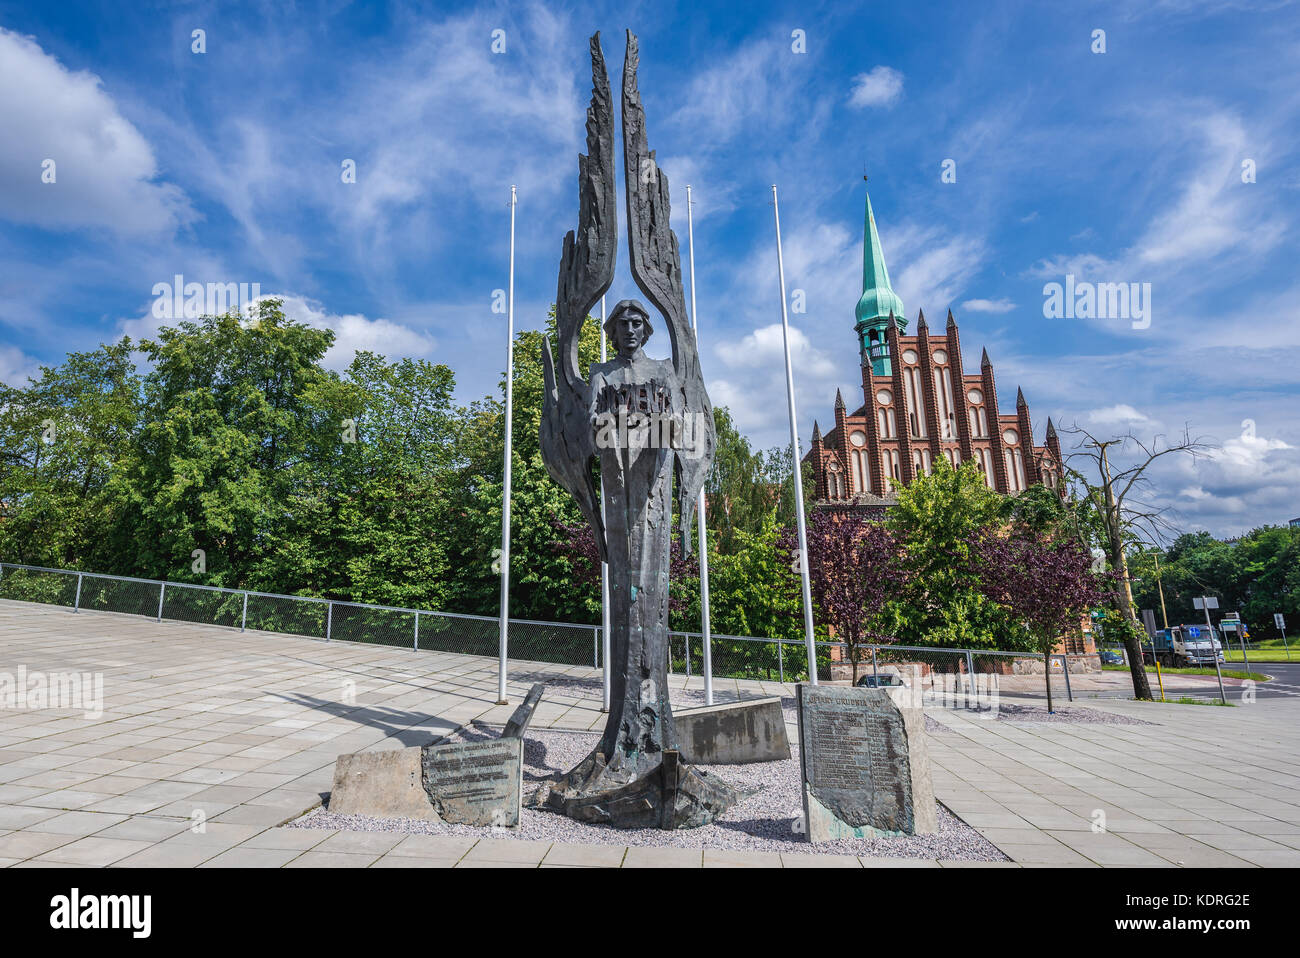 The Angel of Freedom sculpture at Solidarity Square - tribute to the 16 young people killed during a protest in 1970 in Szczecin, Poland. Saints Peter Stock Photo